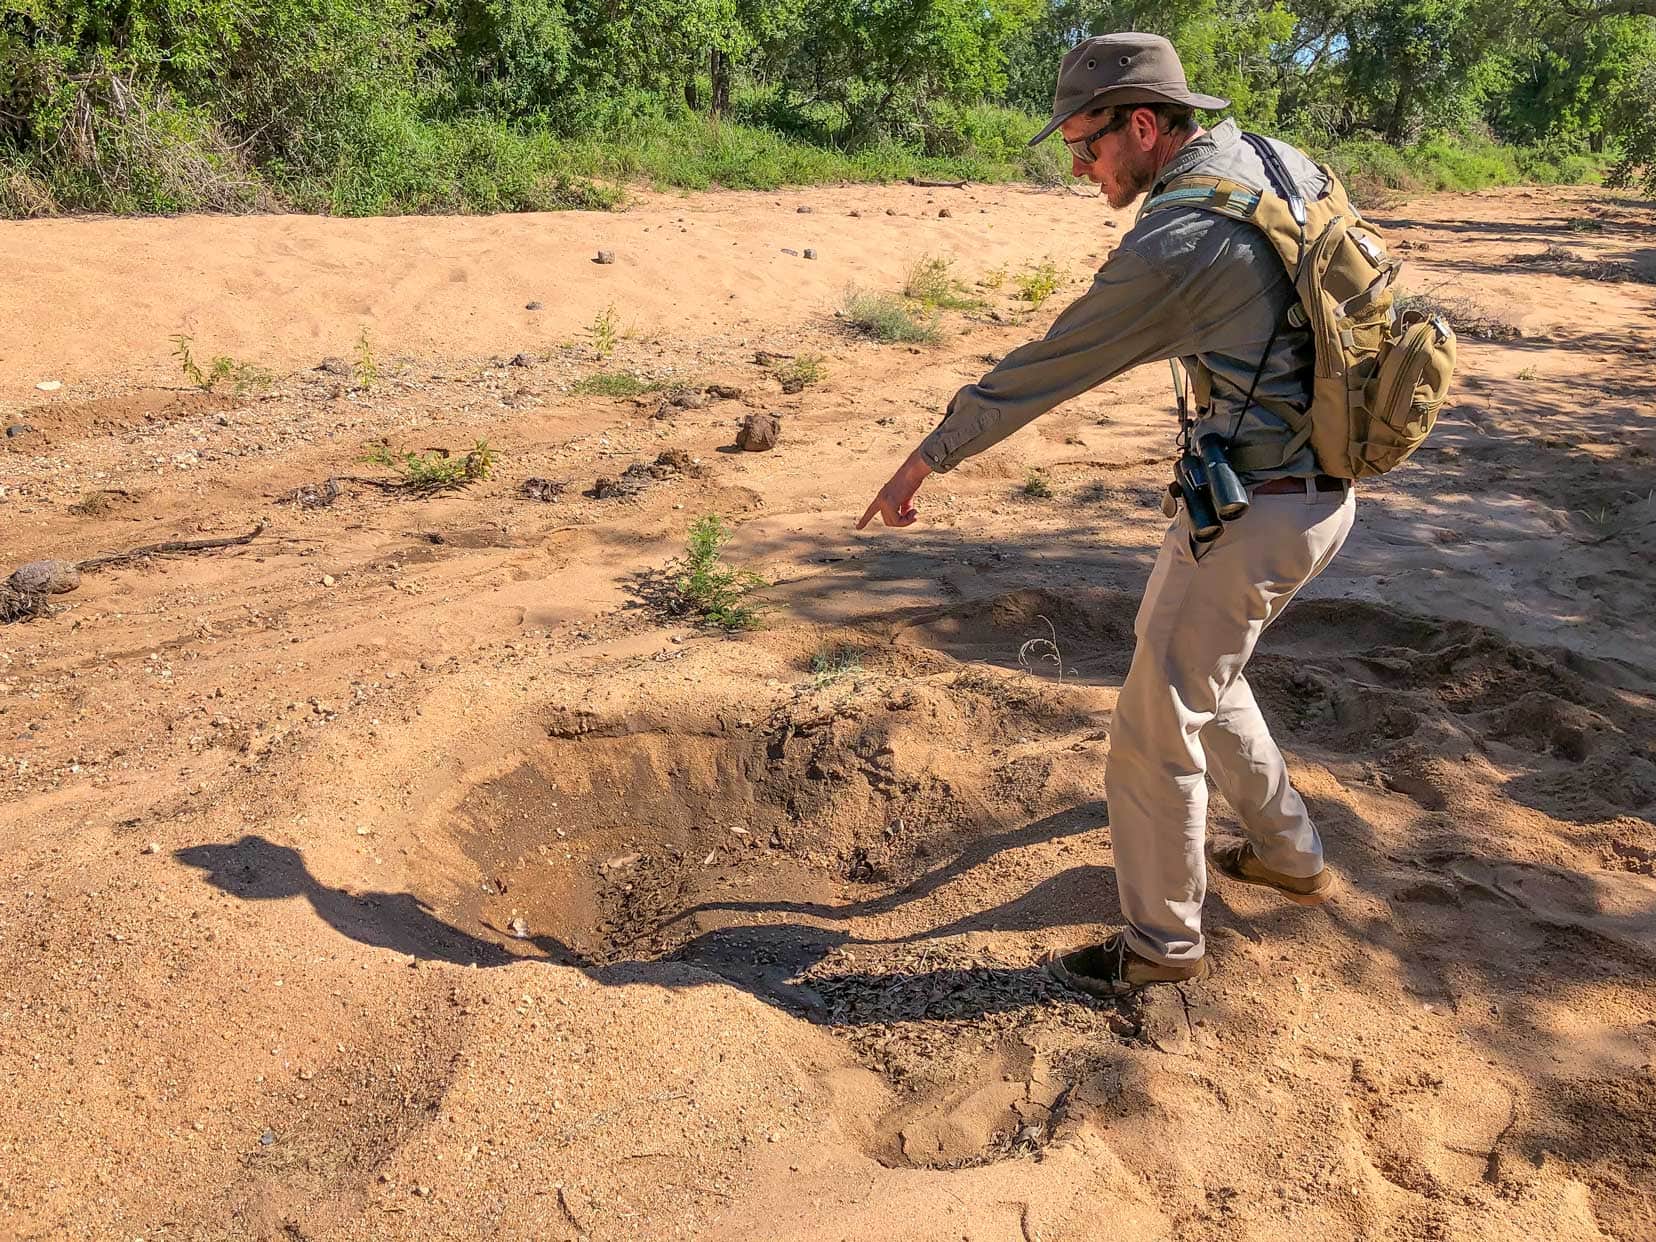 Large indent in the sand showing the resting place of a rhino